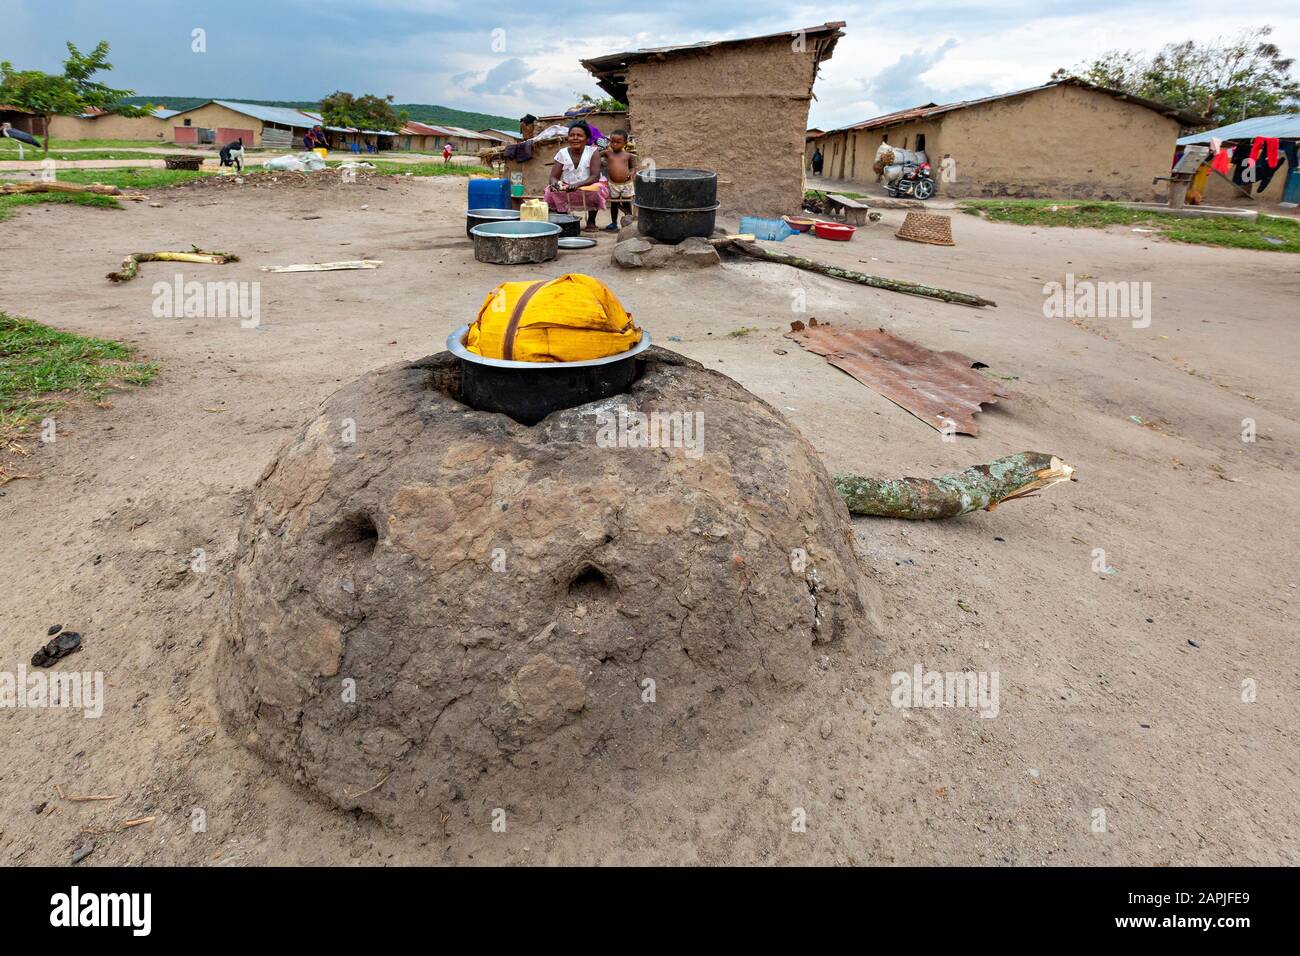 Banana dish known as Matooke is being cooked on top of a domed, earthenware oven, Lake George, Uganda. Stock Photo